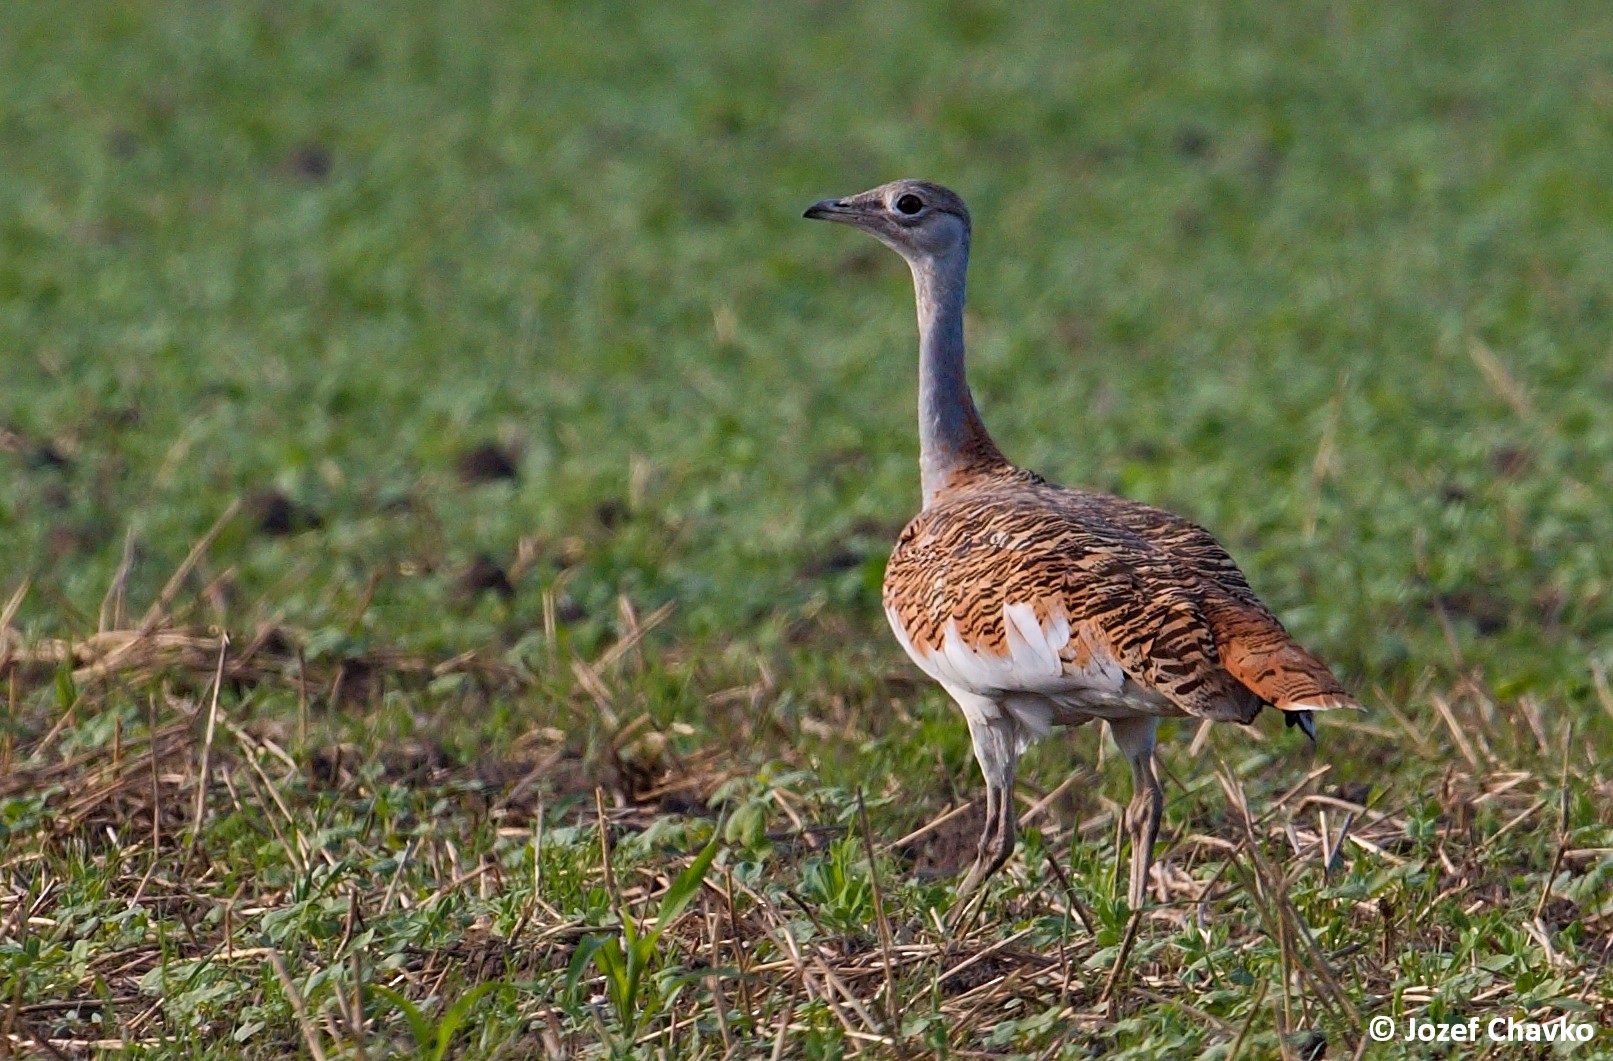 Picture of the Great Bustard Otis tarda standing on the grass